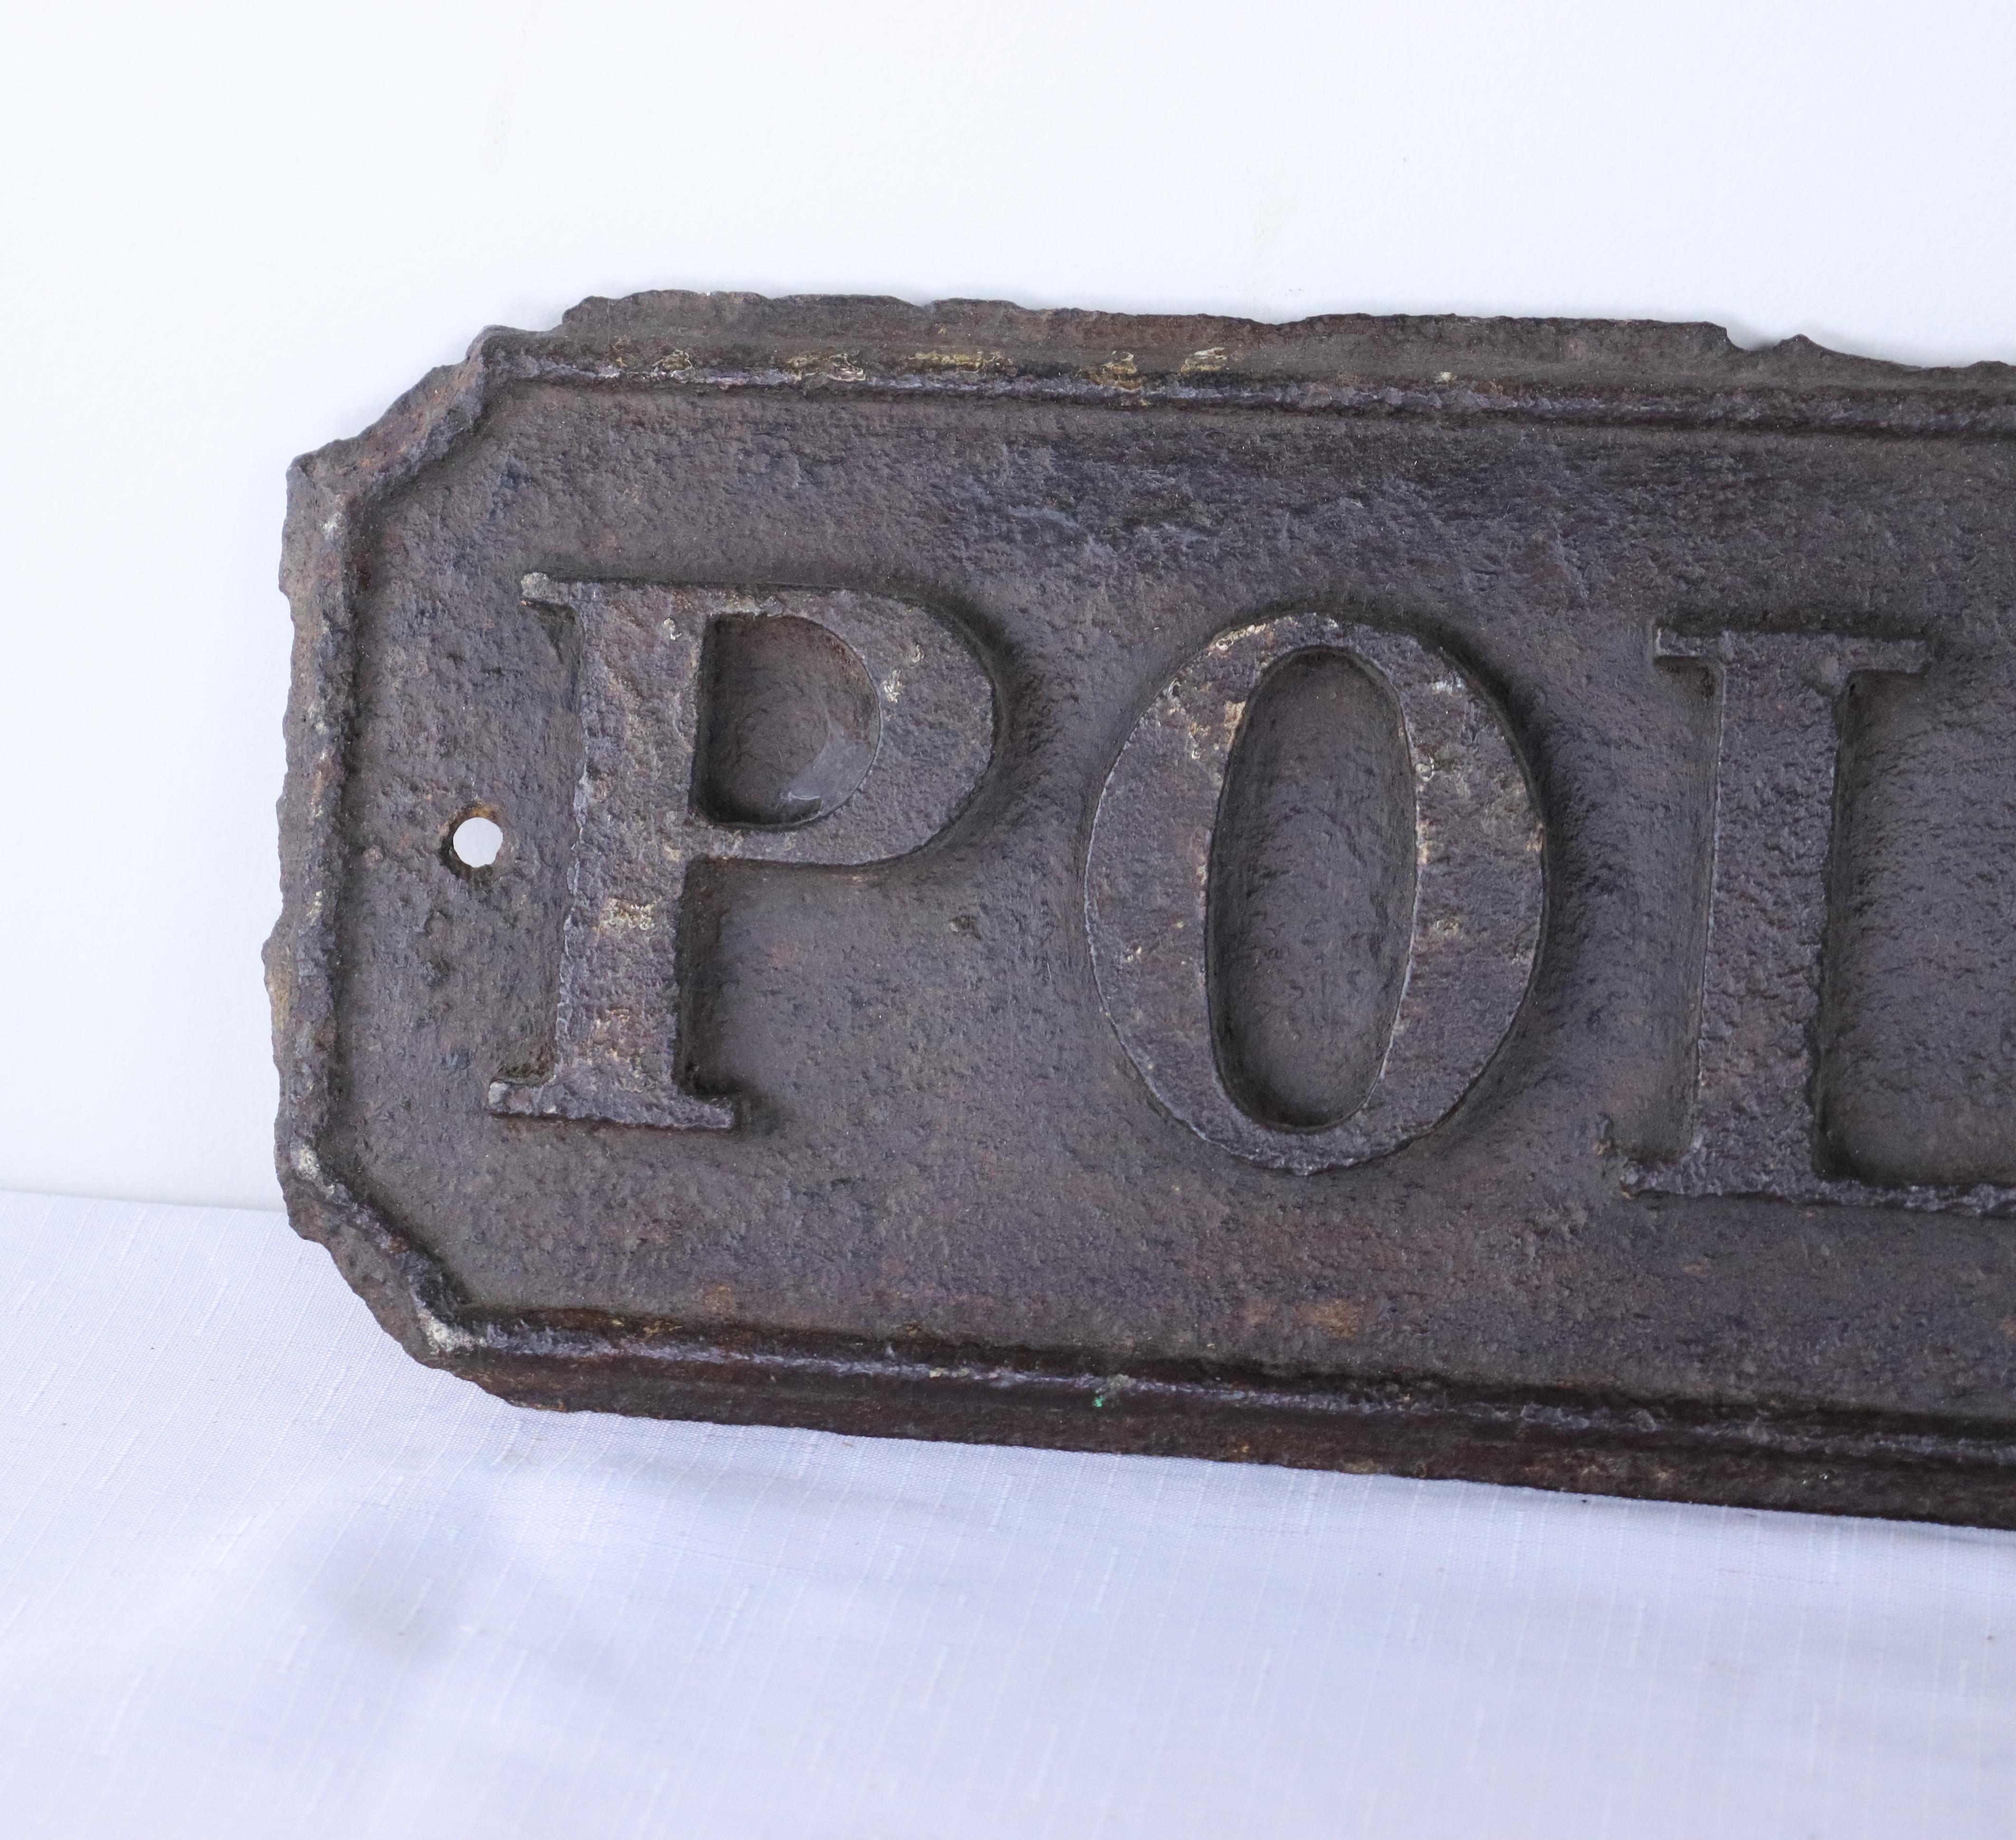 An antique English wrought iron police station sign in good original condition. Manufactured at the Briggs Foundry, Barrow, as seen in the bottom right corner. There are holes at either end for easy display. Quite heavy.